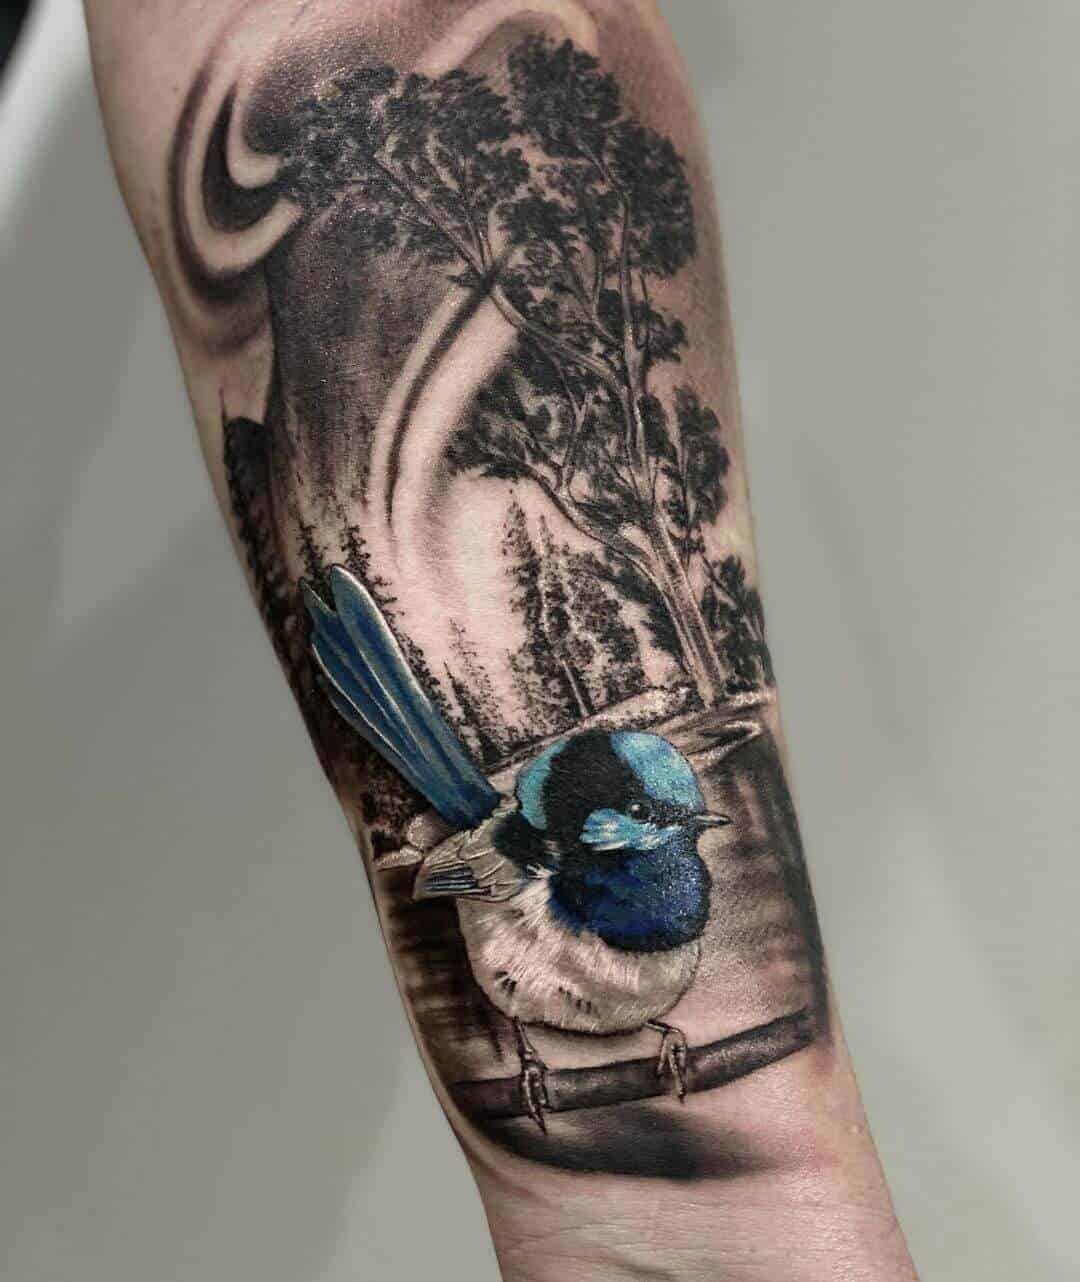 Jade Lomax Art and Tattoo - A fairy wren and Australian flowers for Shawn.  ❤️I'll be taking a couple of weeks off emails as of tonight ❤️ | Facebook